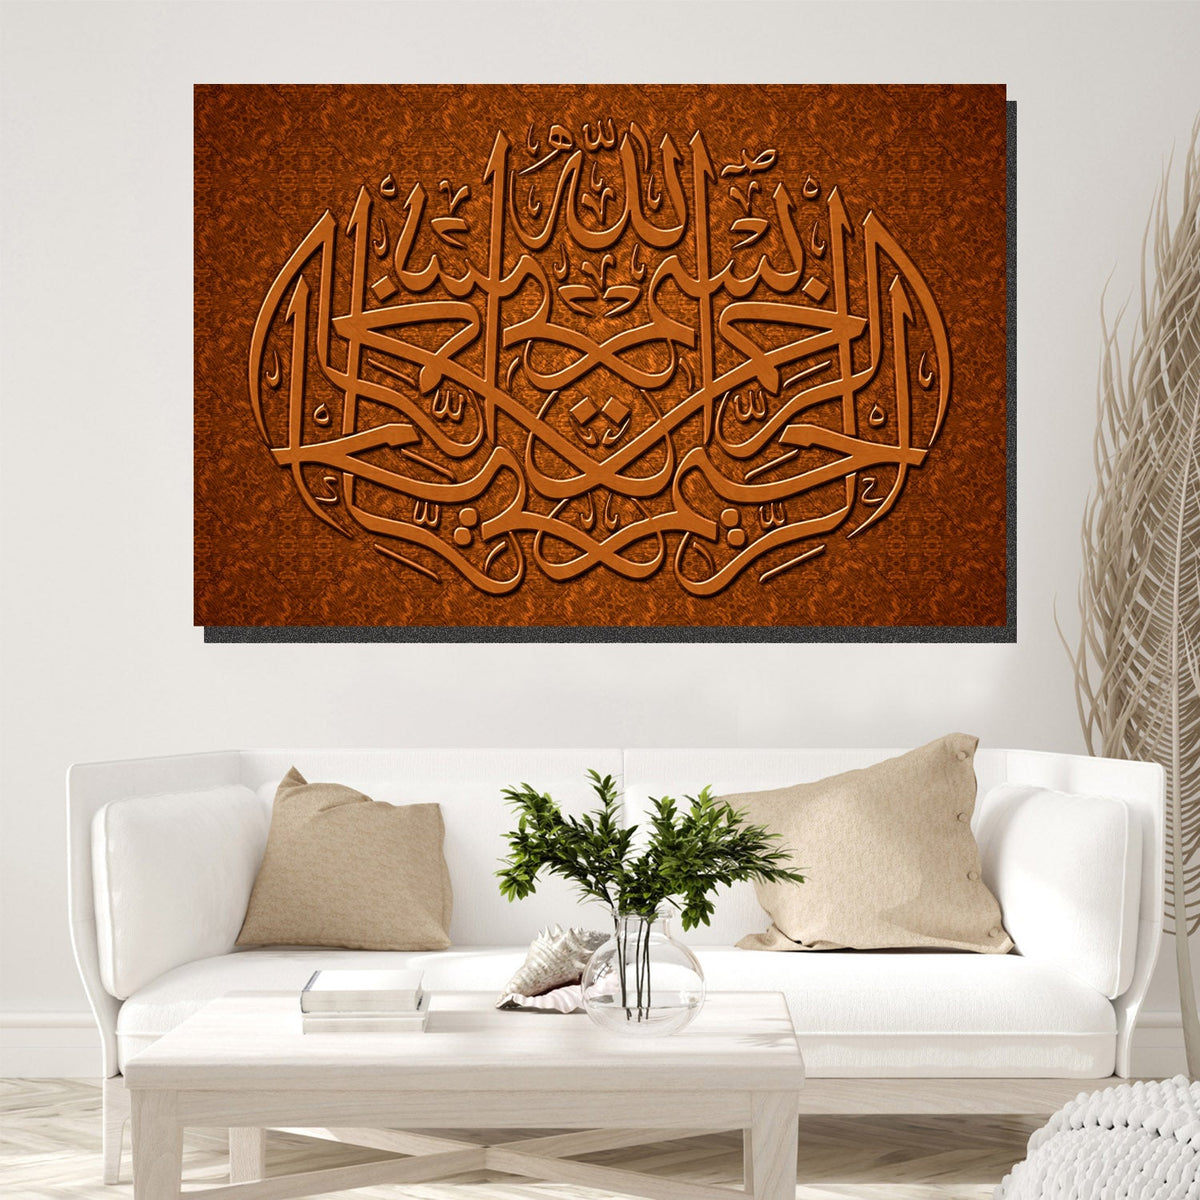 https://cdn.shopify.com/s/files/1/0387/9986/8044/products/BismallahArabicCalligraphyCanvasArtprintStretched-4.jpg